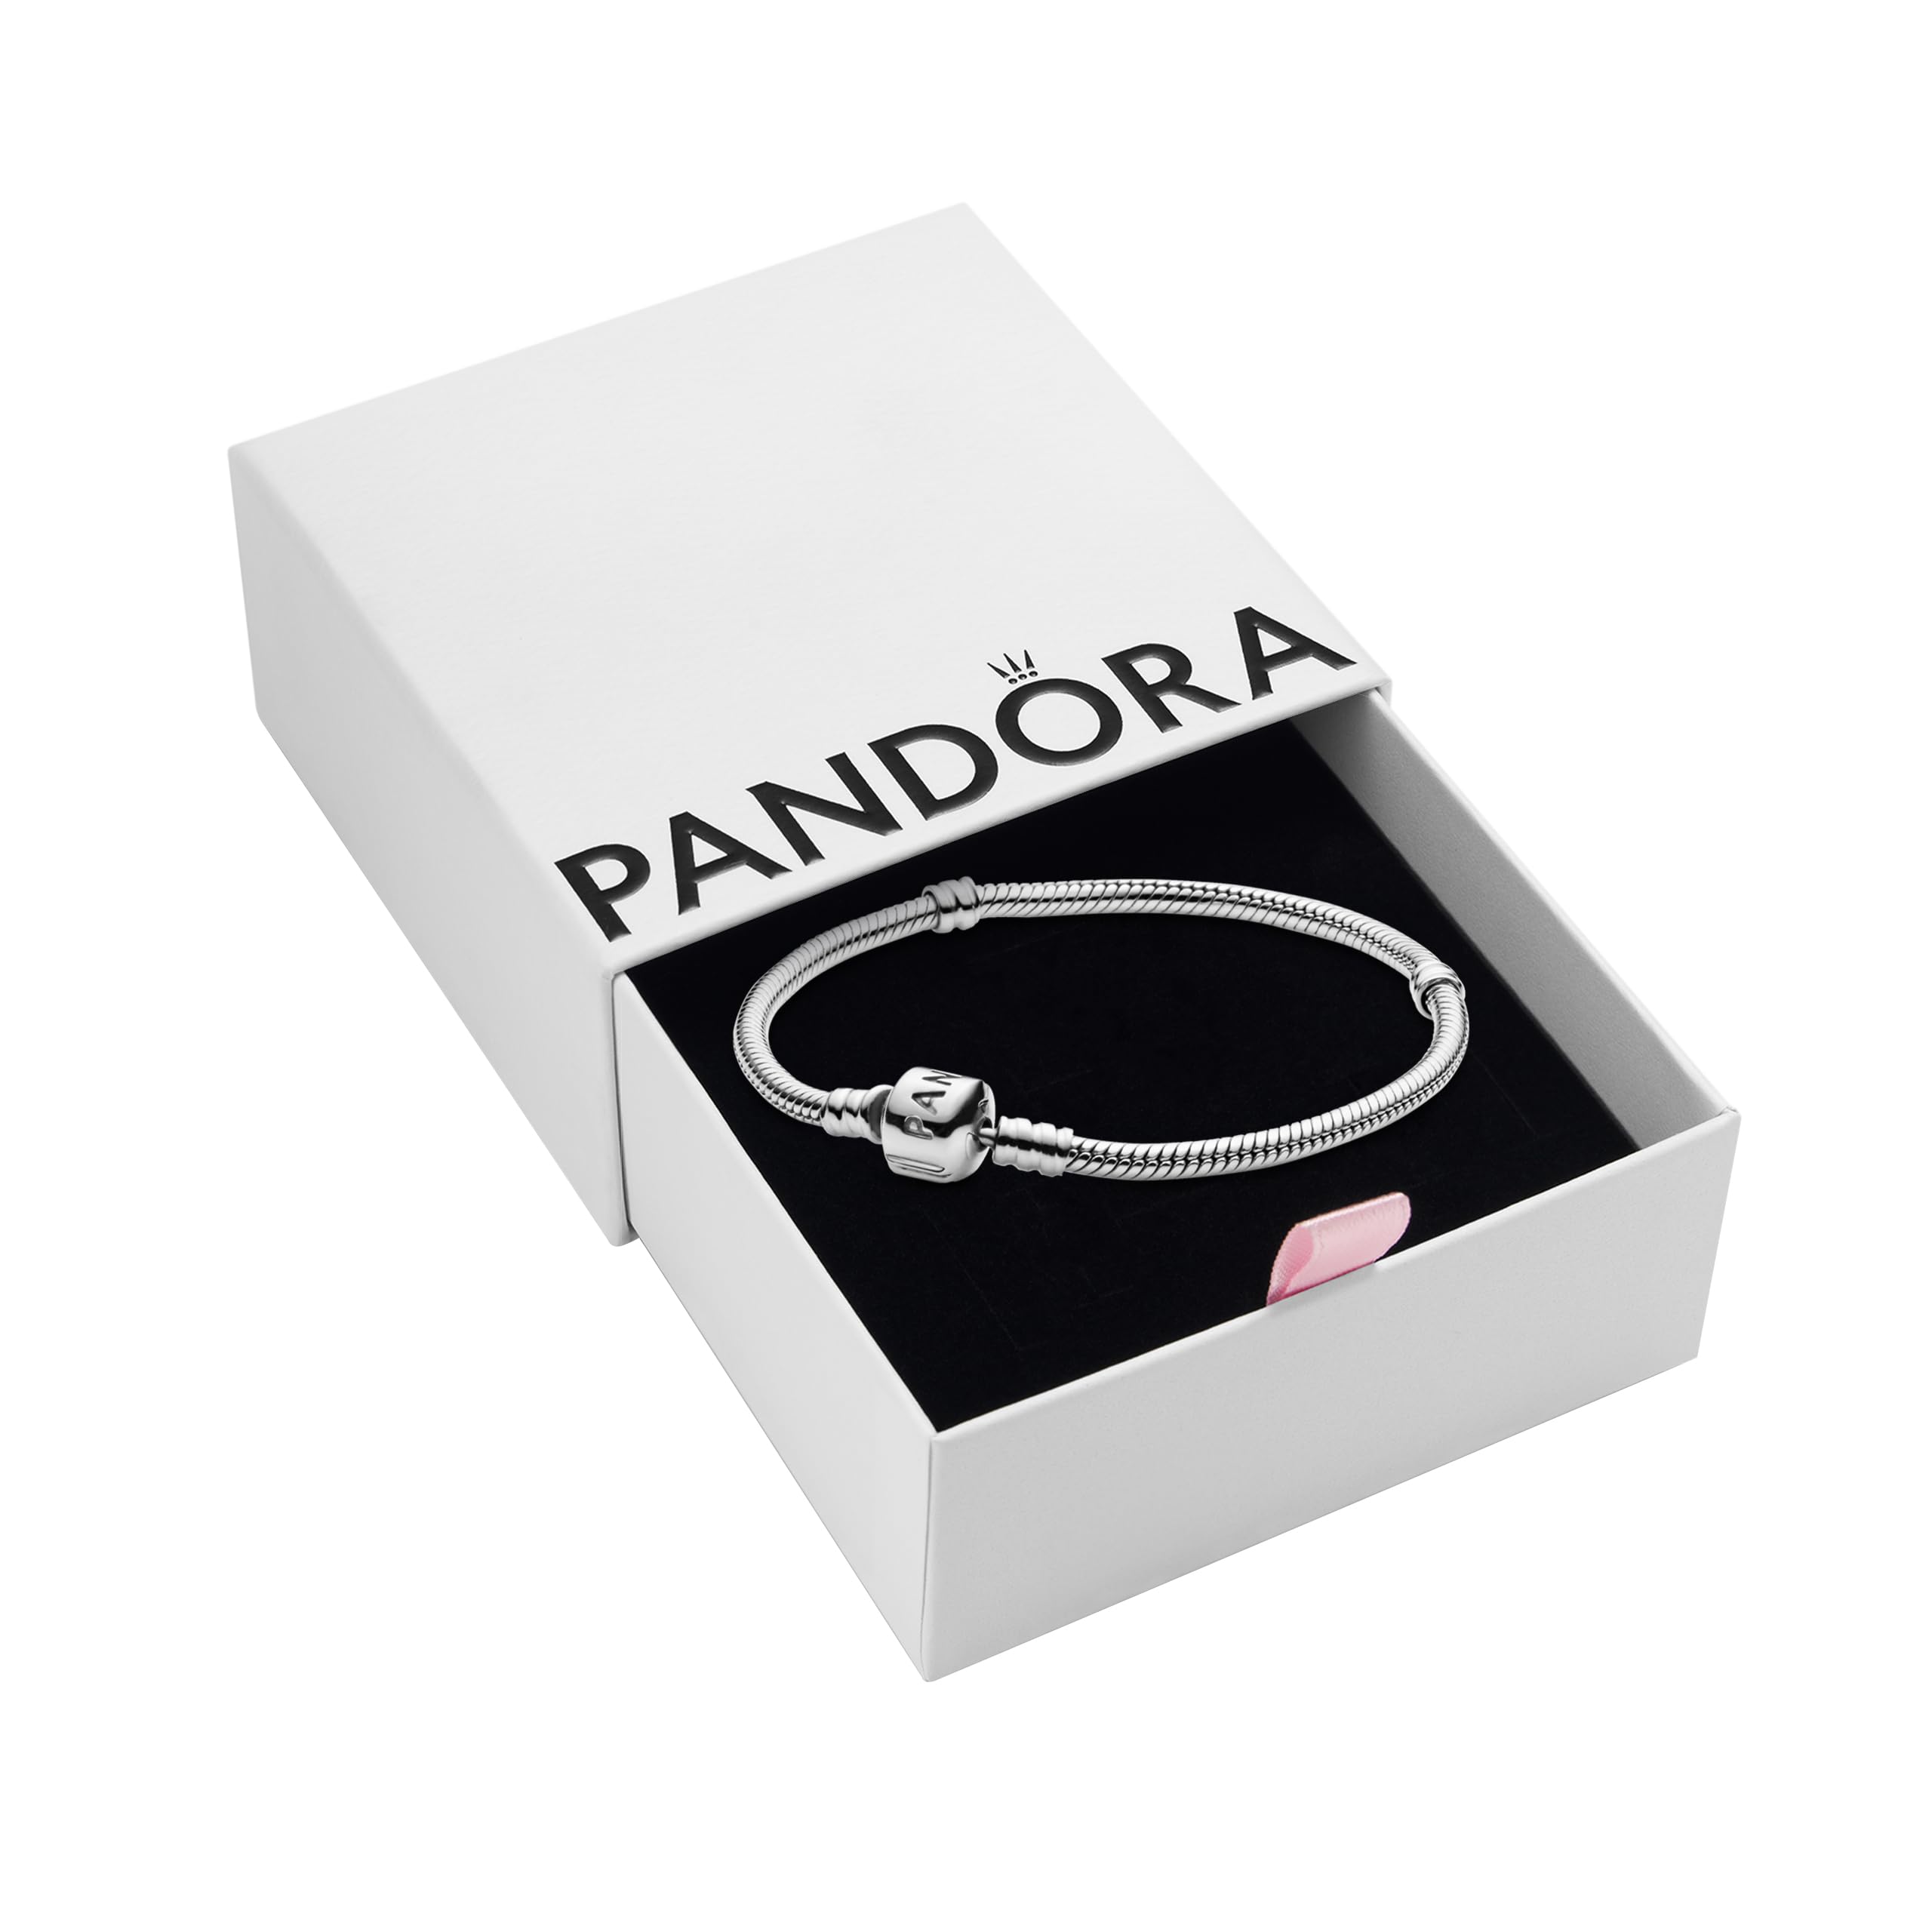 PANDORA Jewelry Iconic Moments Snake Chain Charm Sterling Silver Bracelet, 6.3